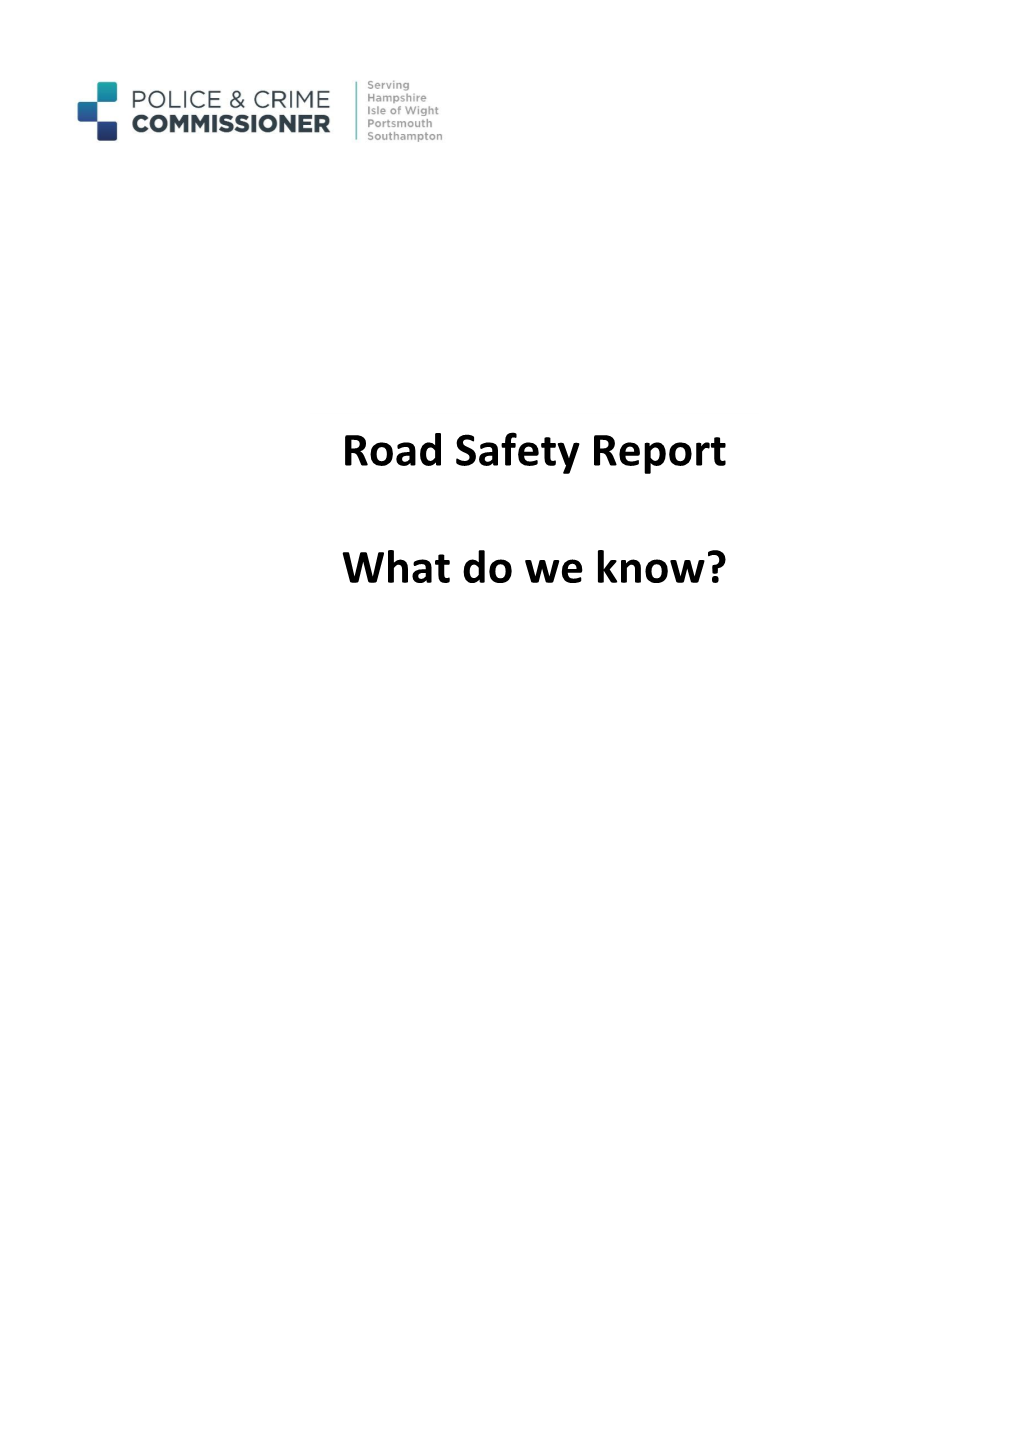 Road Safety Report What Do We Know?